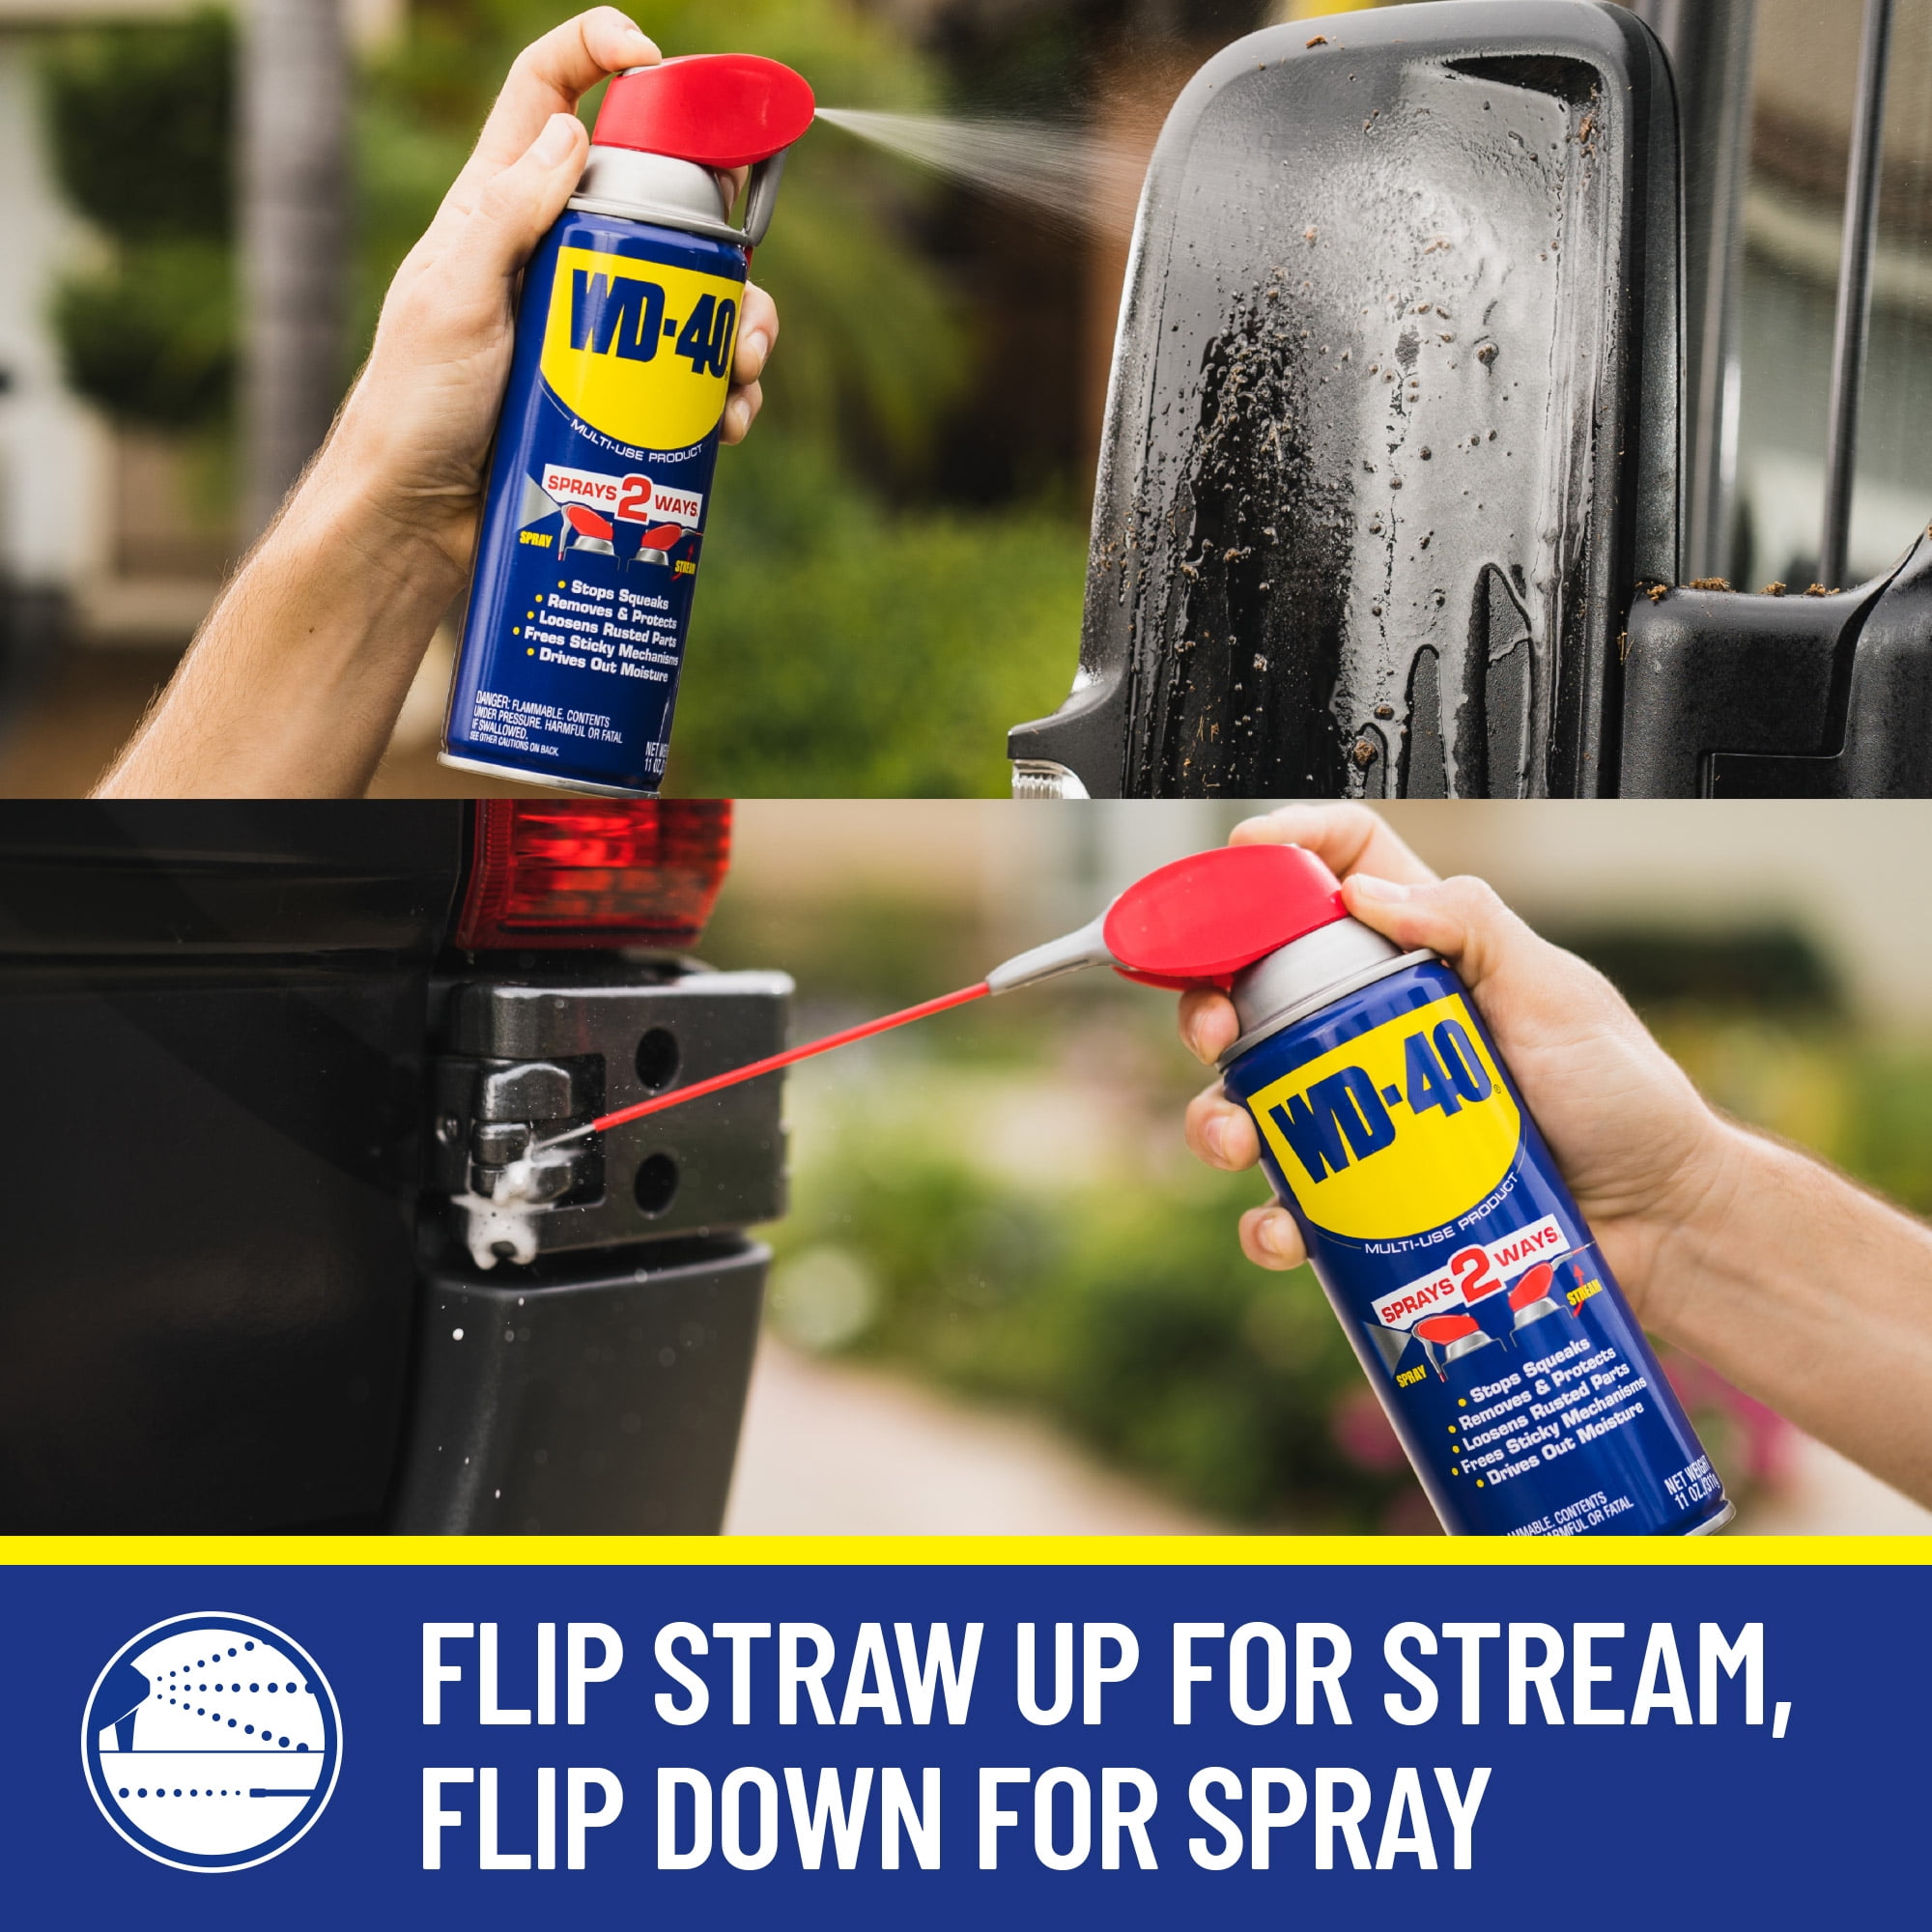 WD-40 - Multifunction spray WD-40 silicone-free canister 5 litres